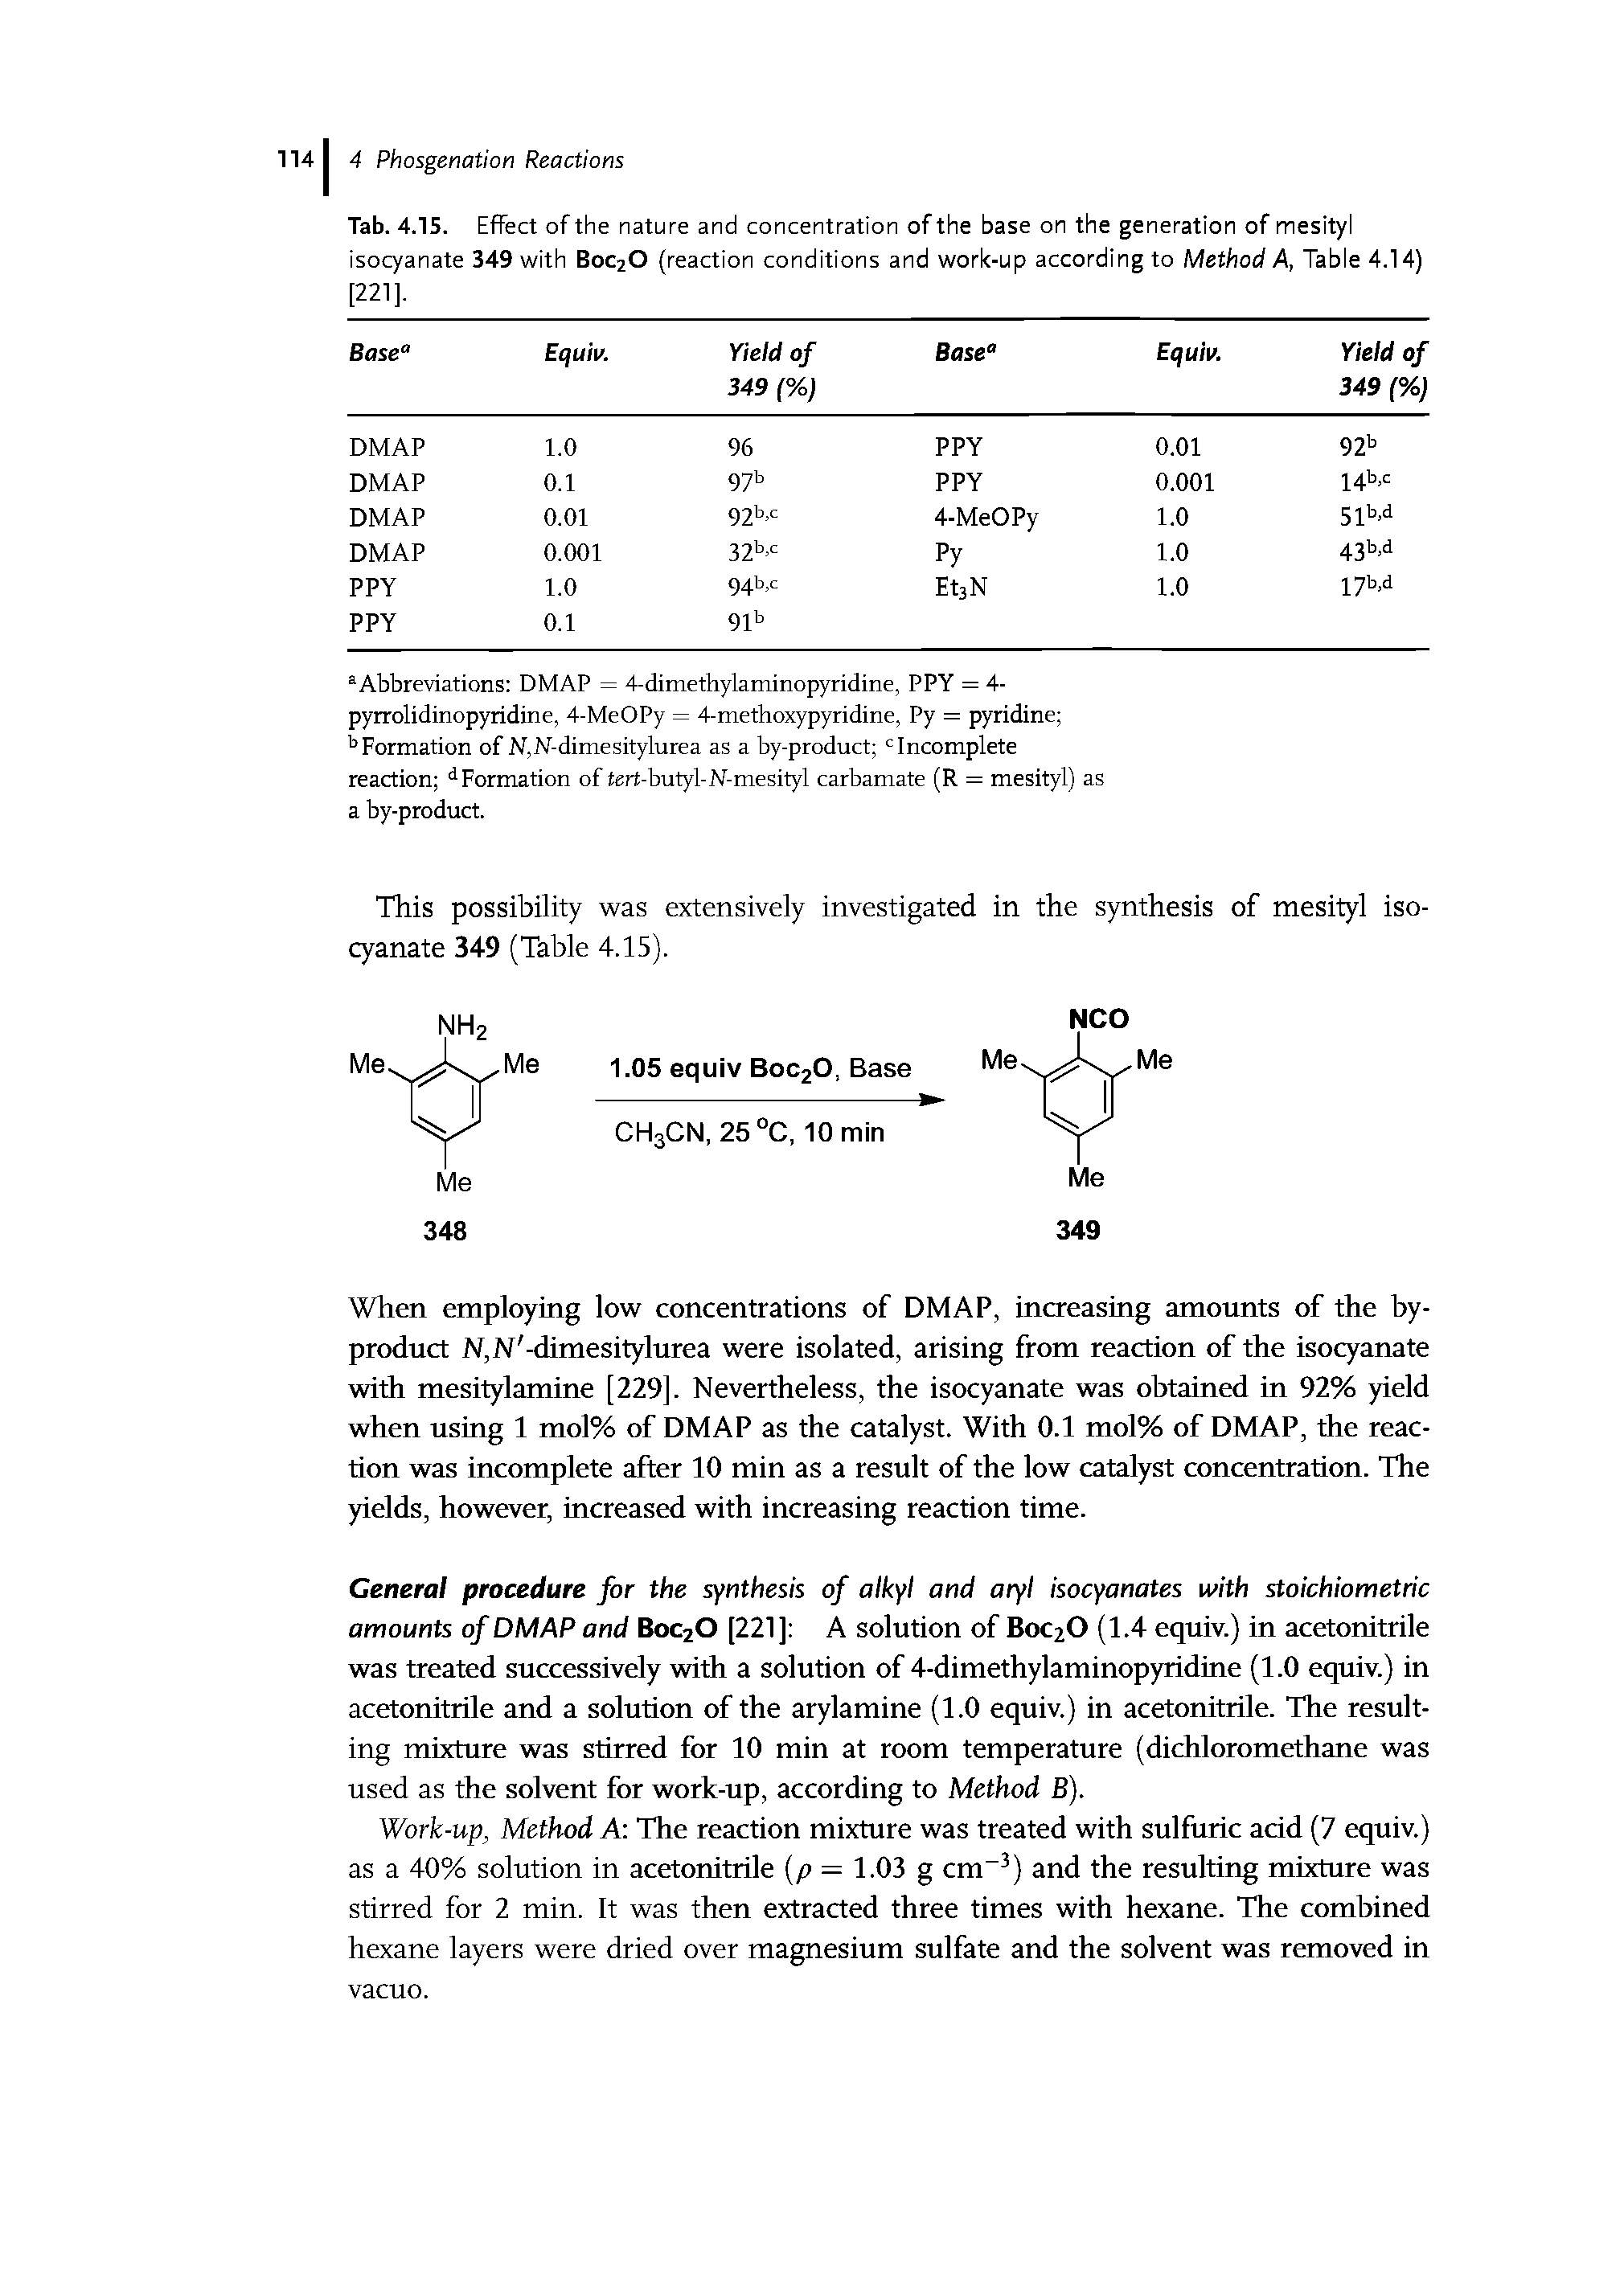 Tab. 4.15. Effect of the nature and concentration of the base on the generation of mesityl isocyanate 349 with B0C2O (reaction conditions and work-up according to Method A, Table 4.14) [221].